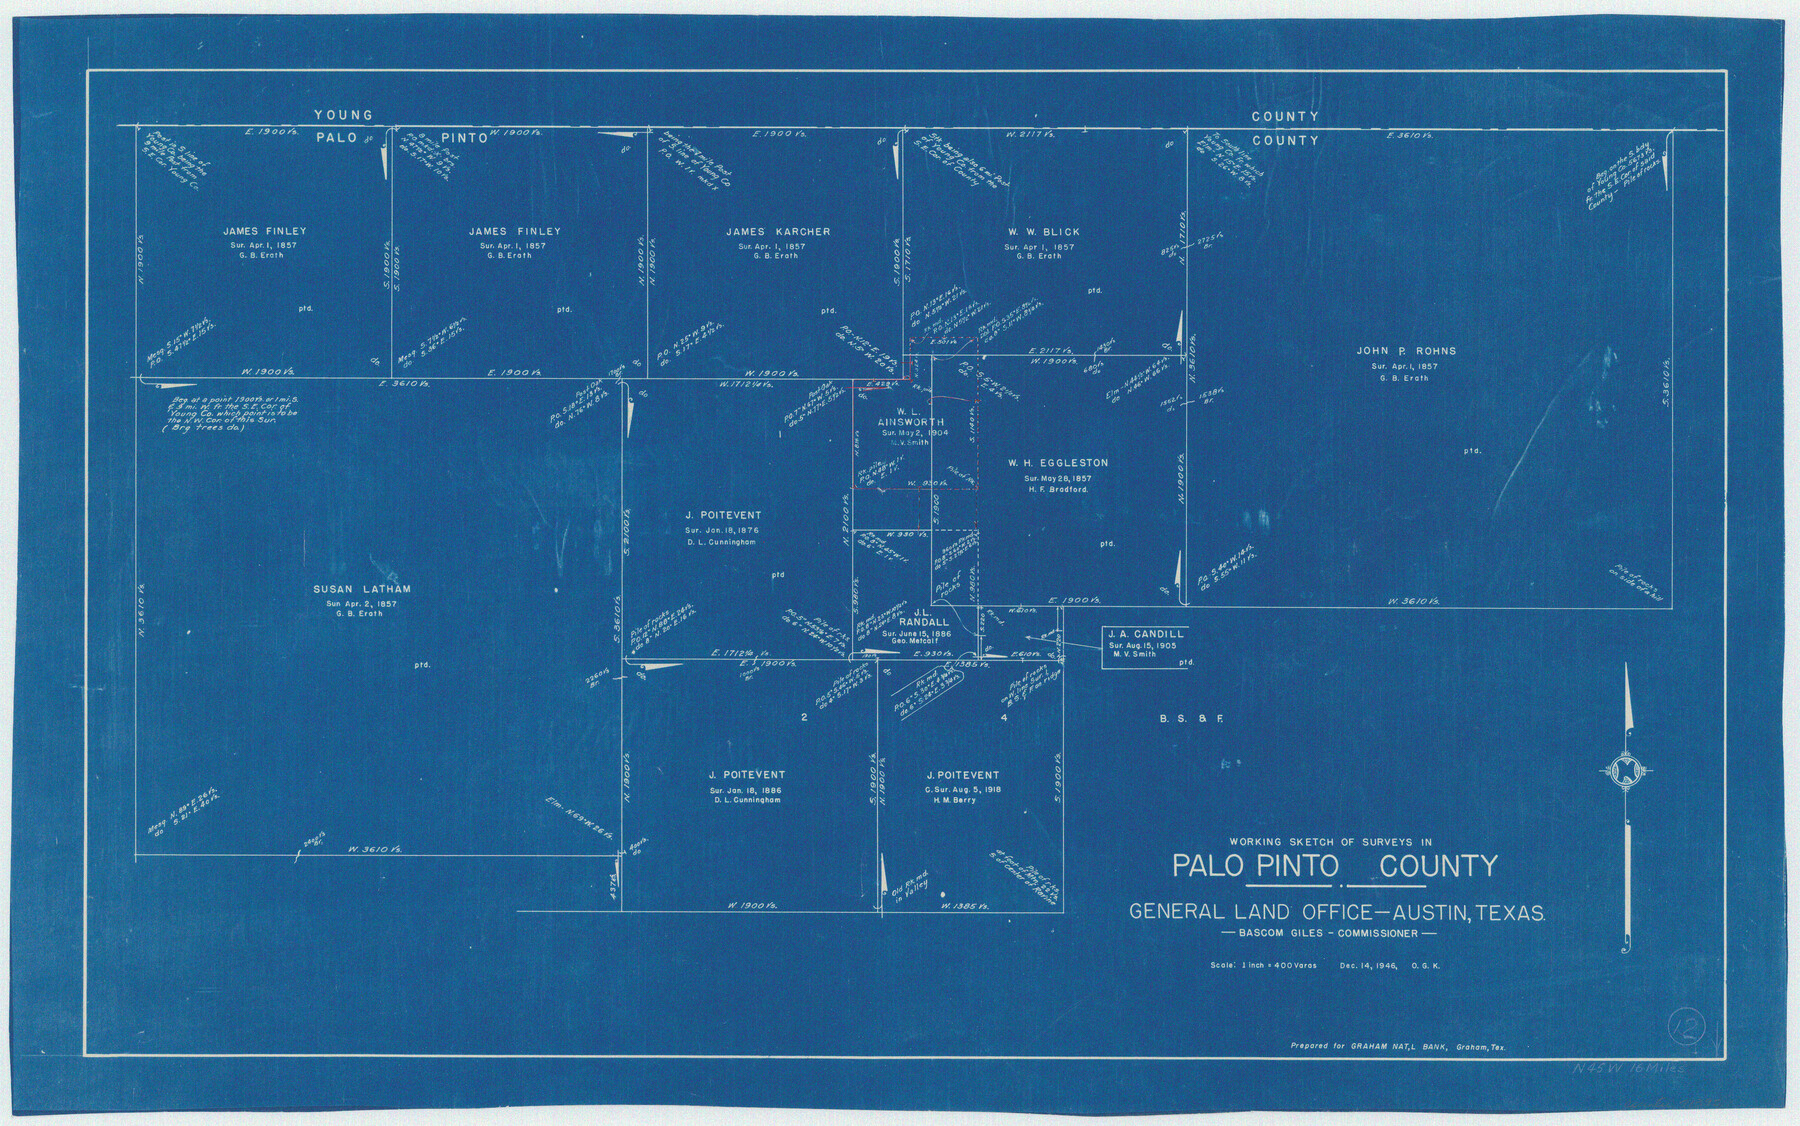 71395, Palo Pinto County Working Sketch 12, General Map Collection